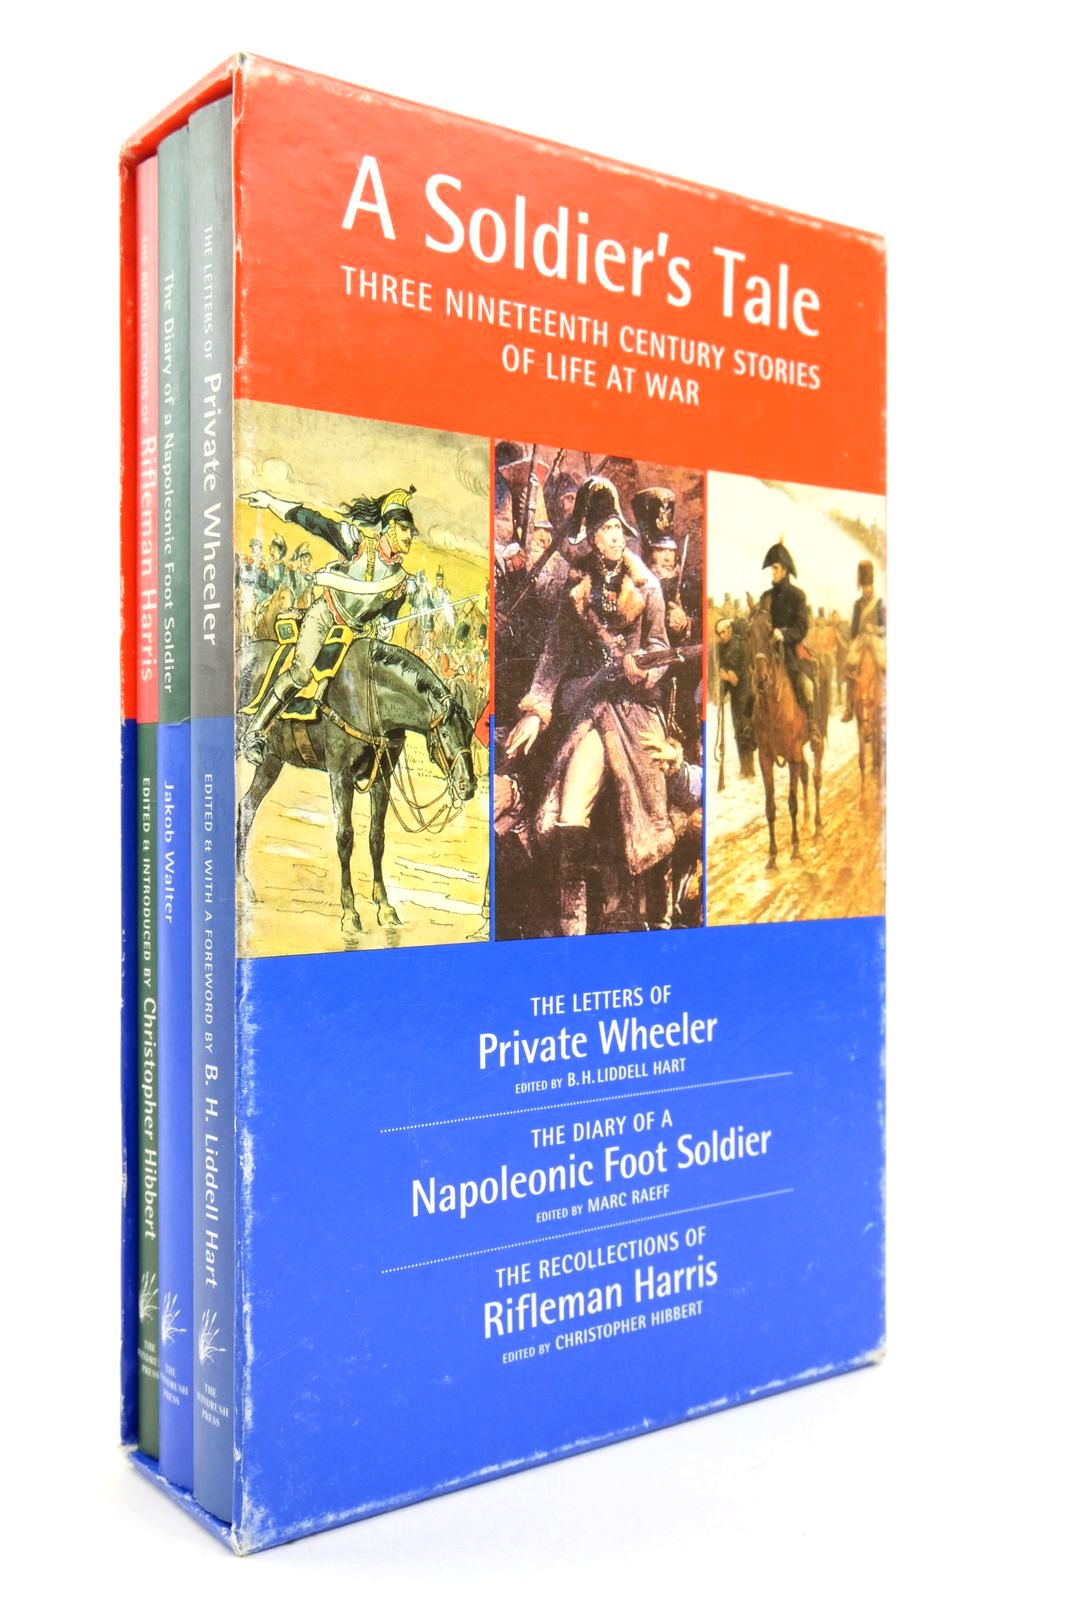 Photo of A SOLDIER'S TALE: THREE NINETEENTH CENTURY STORIES OF LIFE AT WAR (3 VOLUMES) written by Hart, B.H. Liddell Raeff, Marc Hibbert, Christopher Walter, Jakob published by The Windrush Press (STOCK CODE: 2136702)  for sale by Stella & Rose's Books